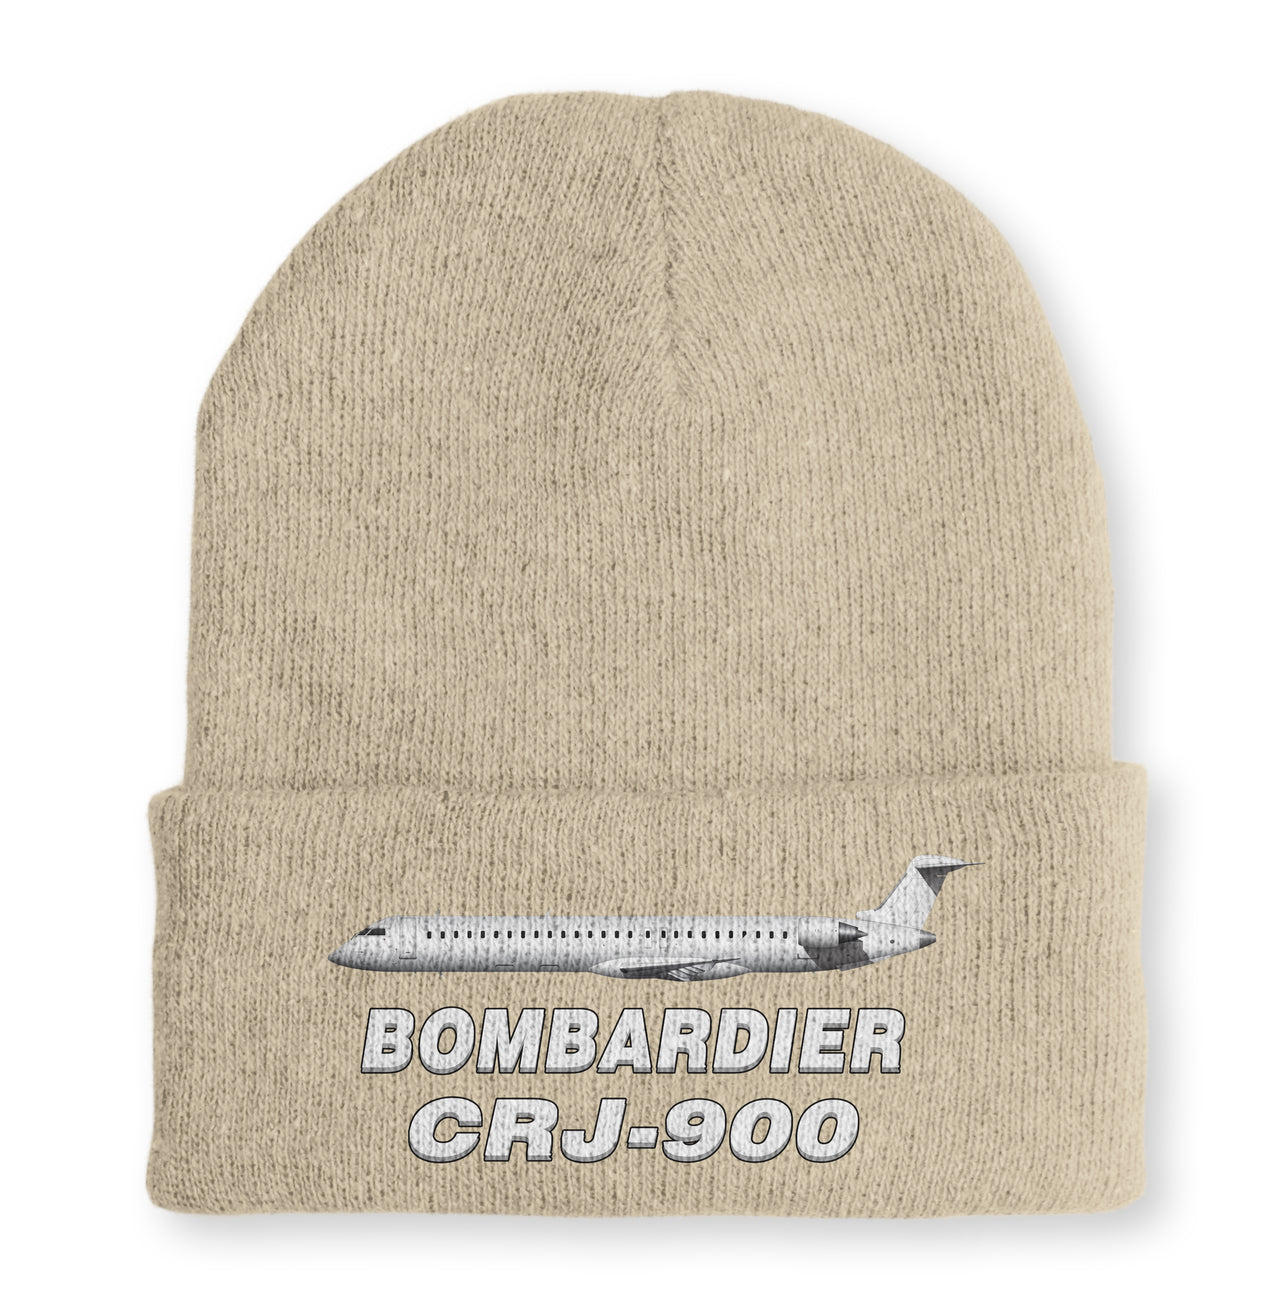 Bombardier CRJ-900 Embroidered Beanies